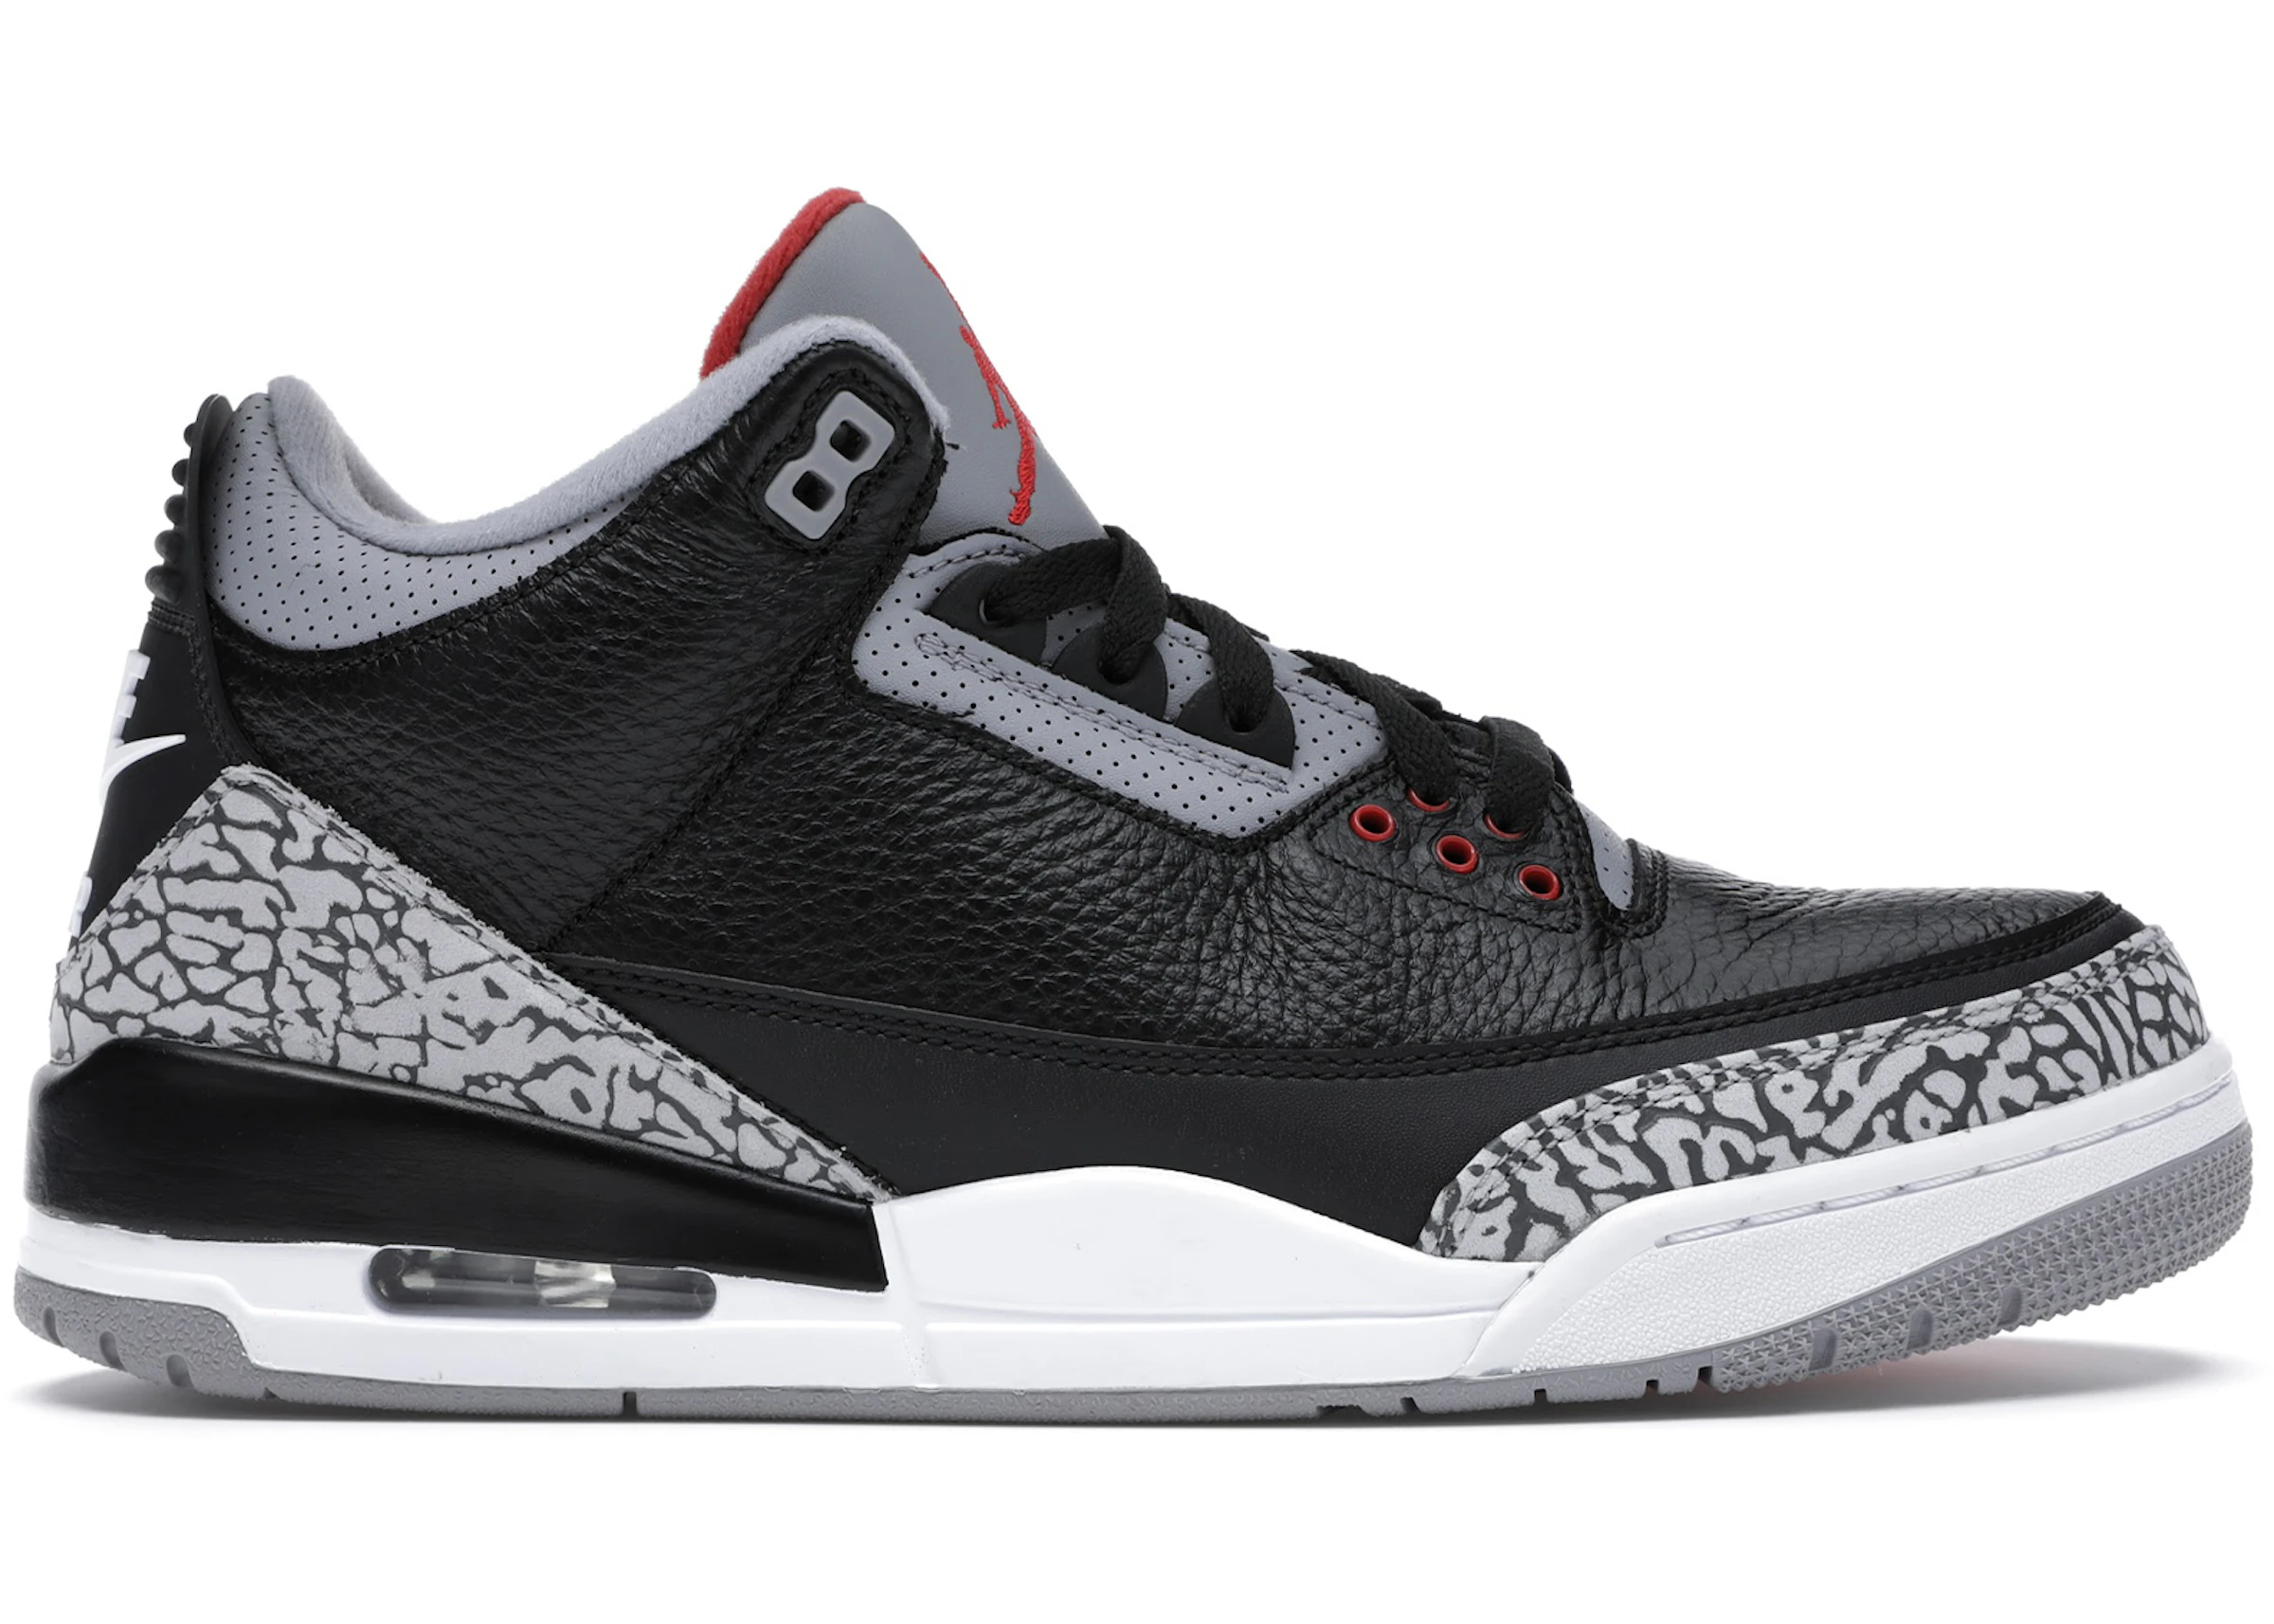 a cup of computer Ananiver Jordan 3 Retro Black Cement (2018) - 854262-001 - US